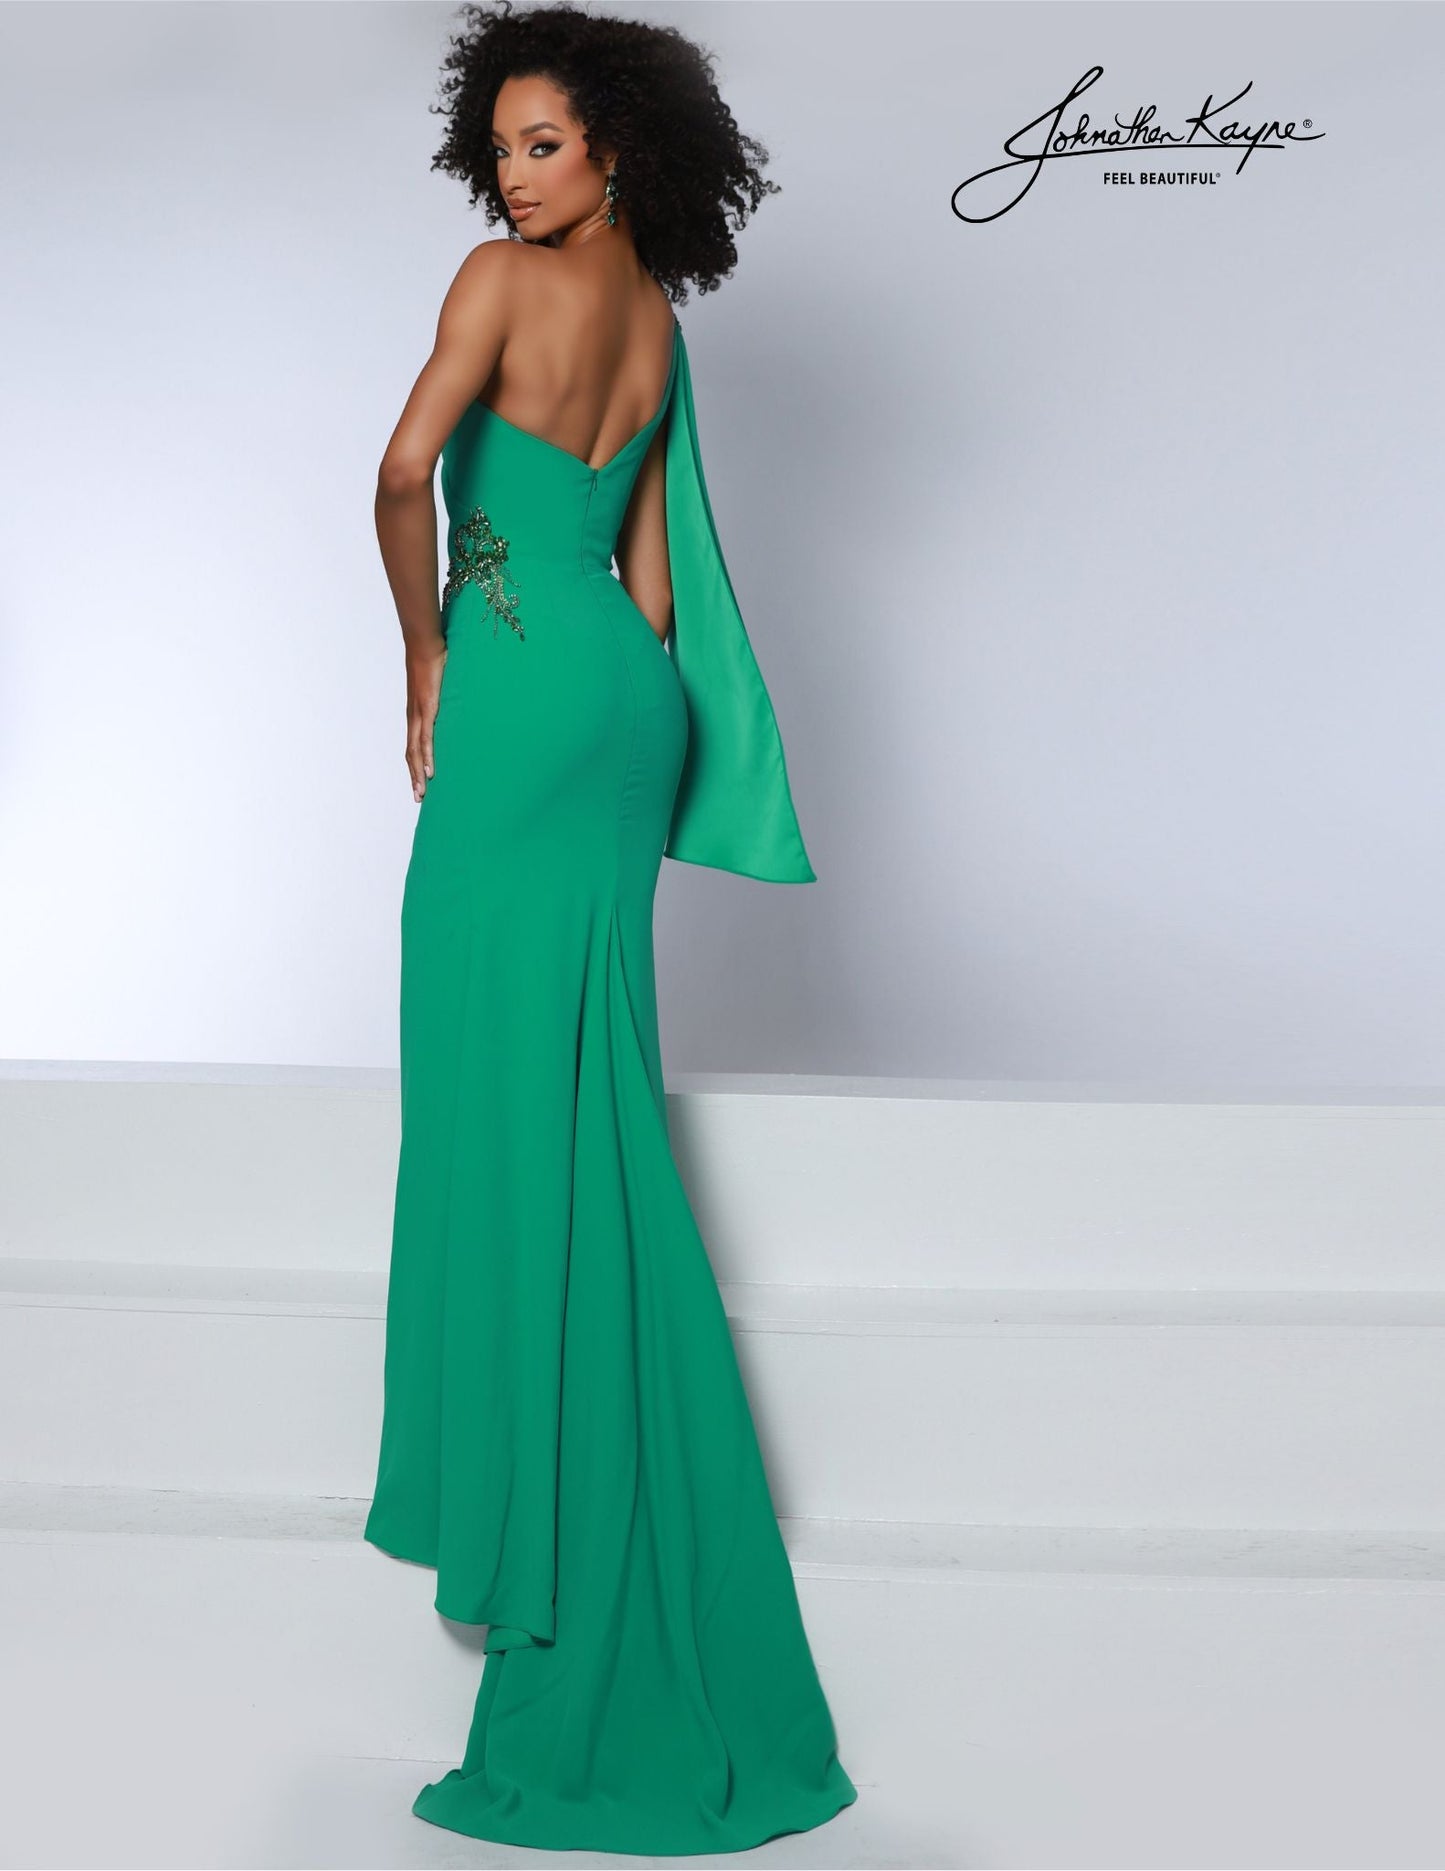 The Johnathan Kayne 2864 long prom dress features a one-shoulder silhouette and crepe fabric with encrusted crystals for an elegant look. The slit tail and high side slit add a touch of drama to make a lasting impression. This formal and pageant gown is perfect for special occasions. Get ready to take the crown in our one-shoulder stretch crepe gown. Adorned with stunning encrusted crystals on the one shoulder bodice and side, this gown is a regal masterpiece of style and grace. 